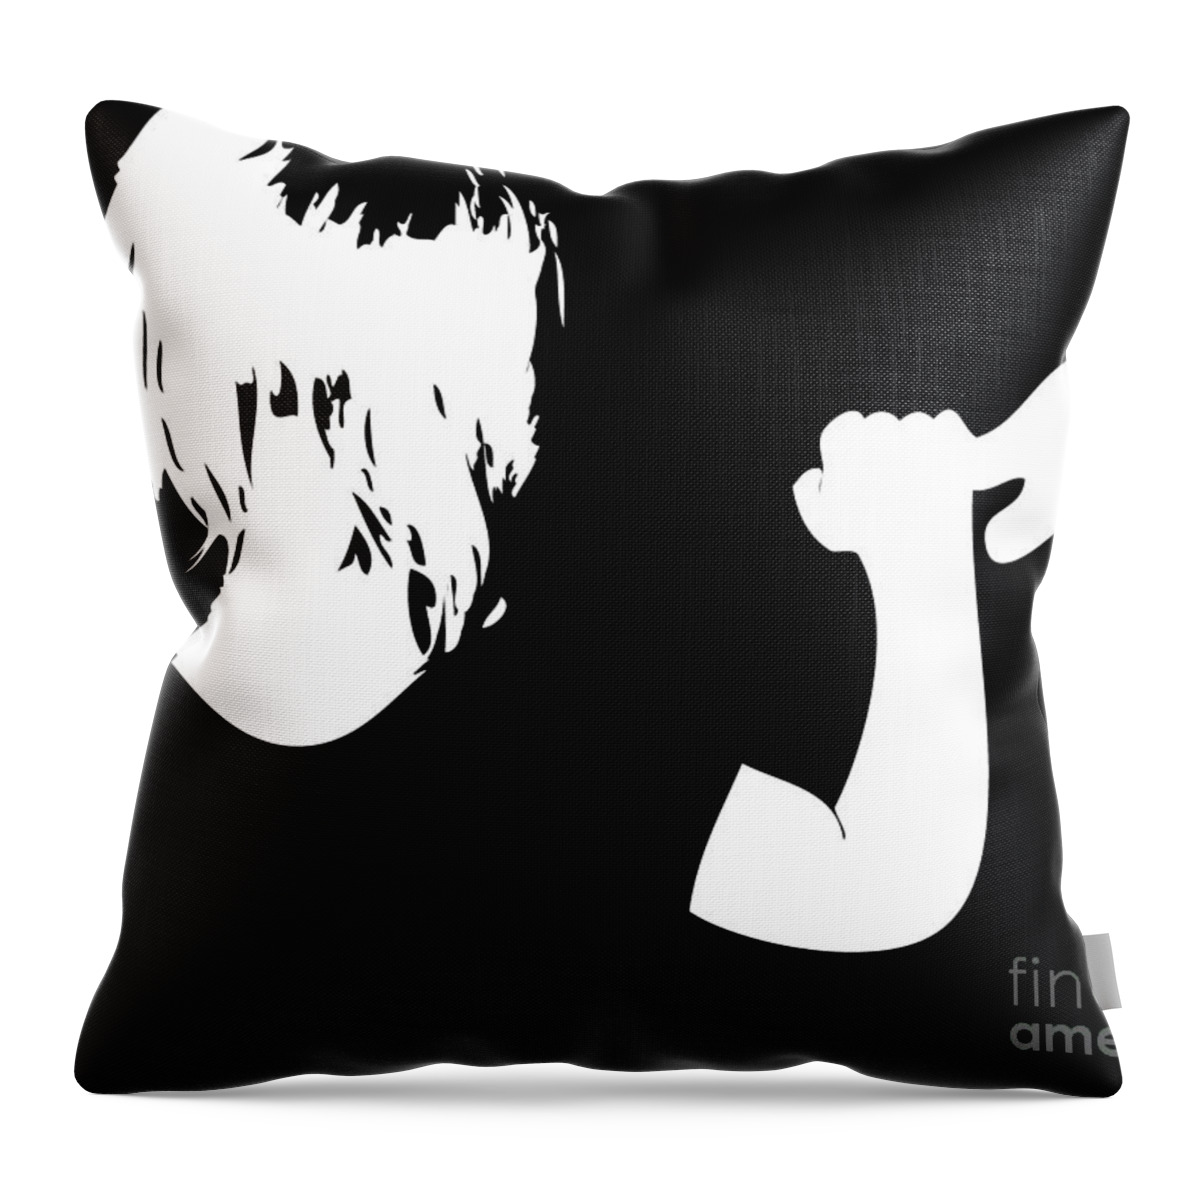 Digital Art Throw Pillow featuring the digital art Why by Laura Brightwood